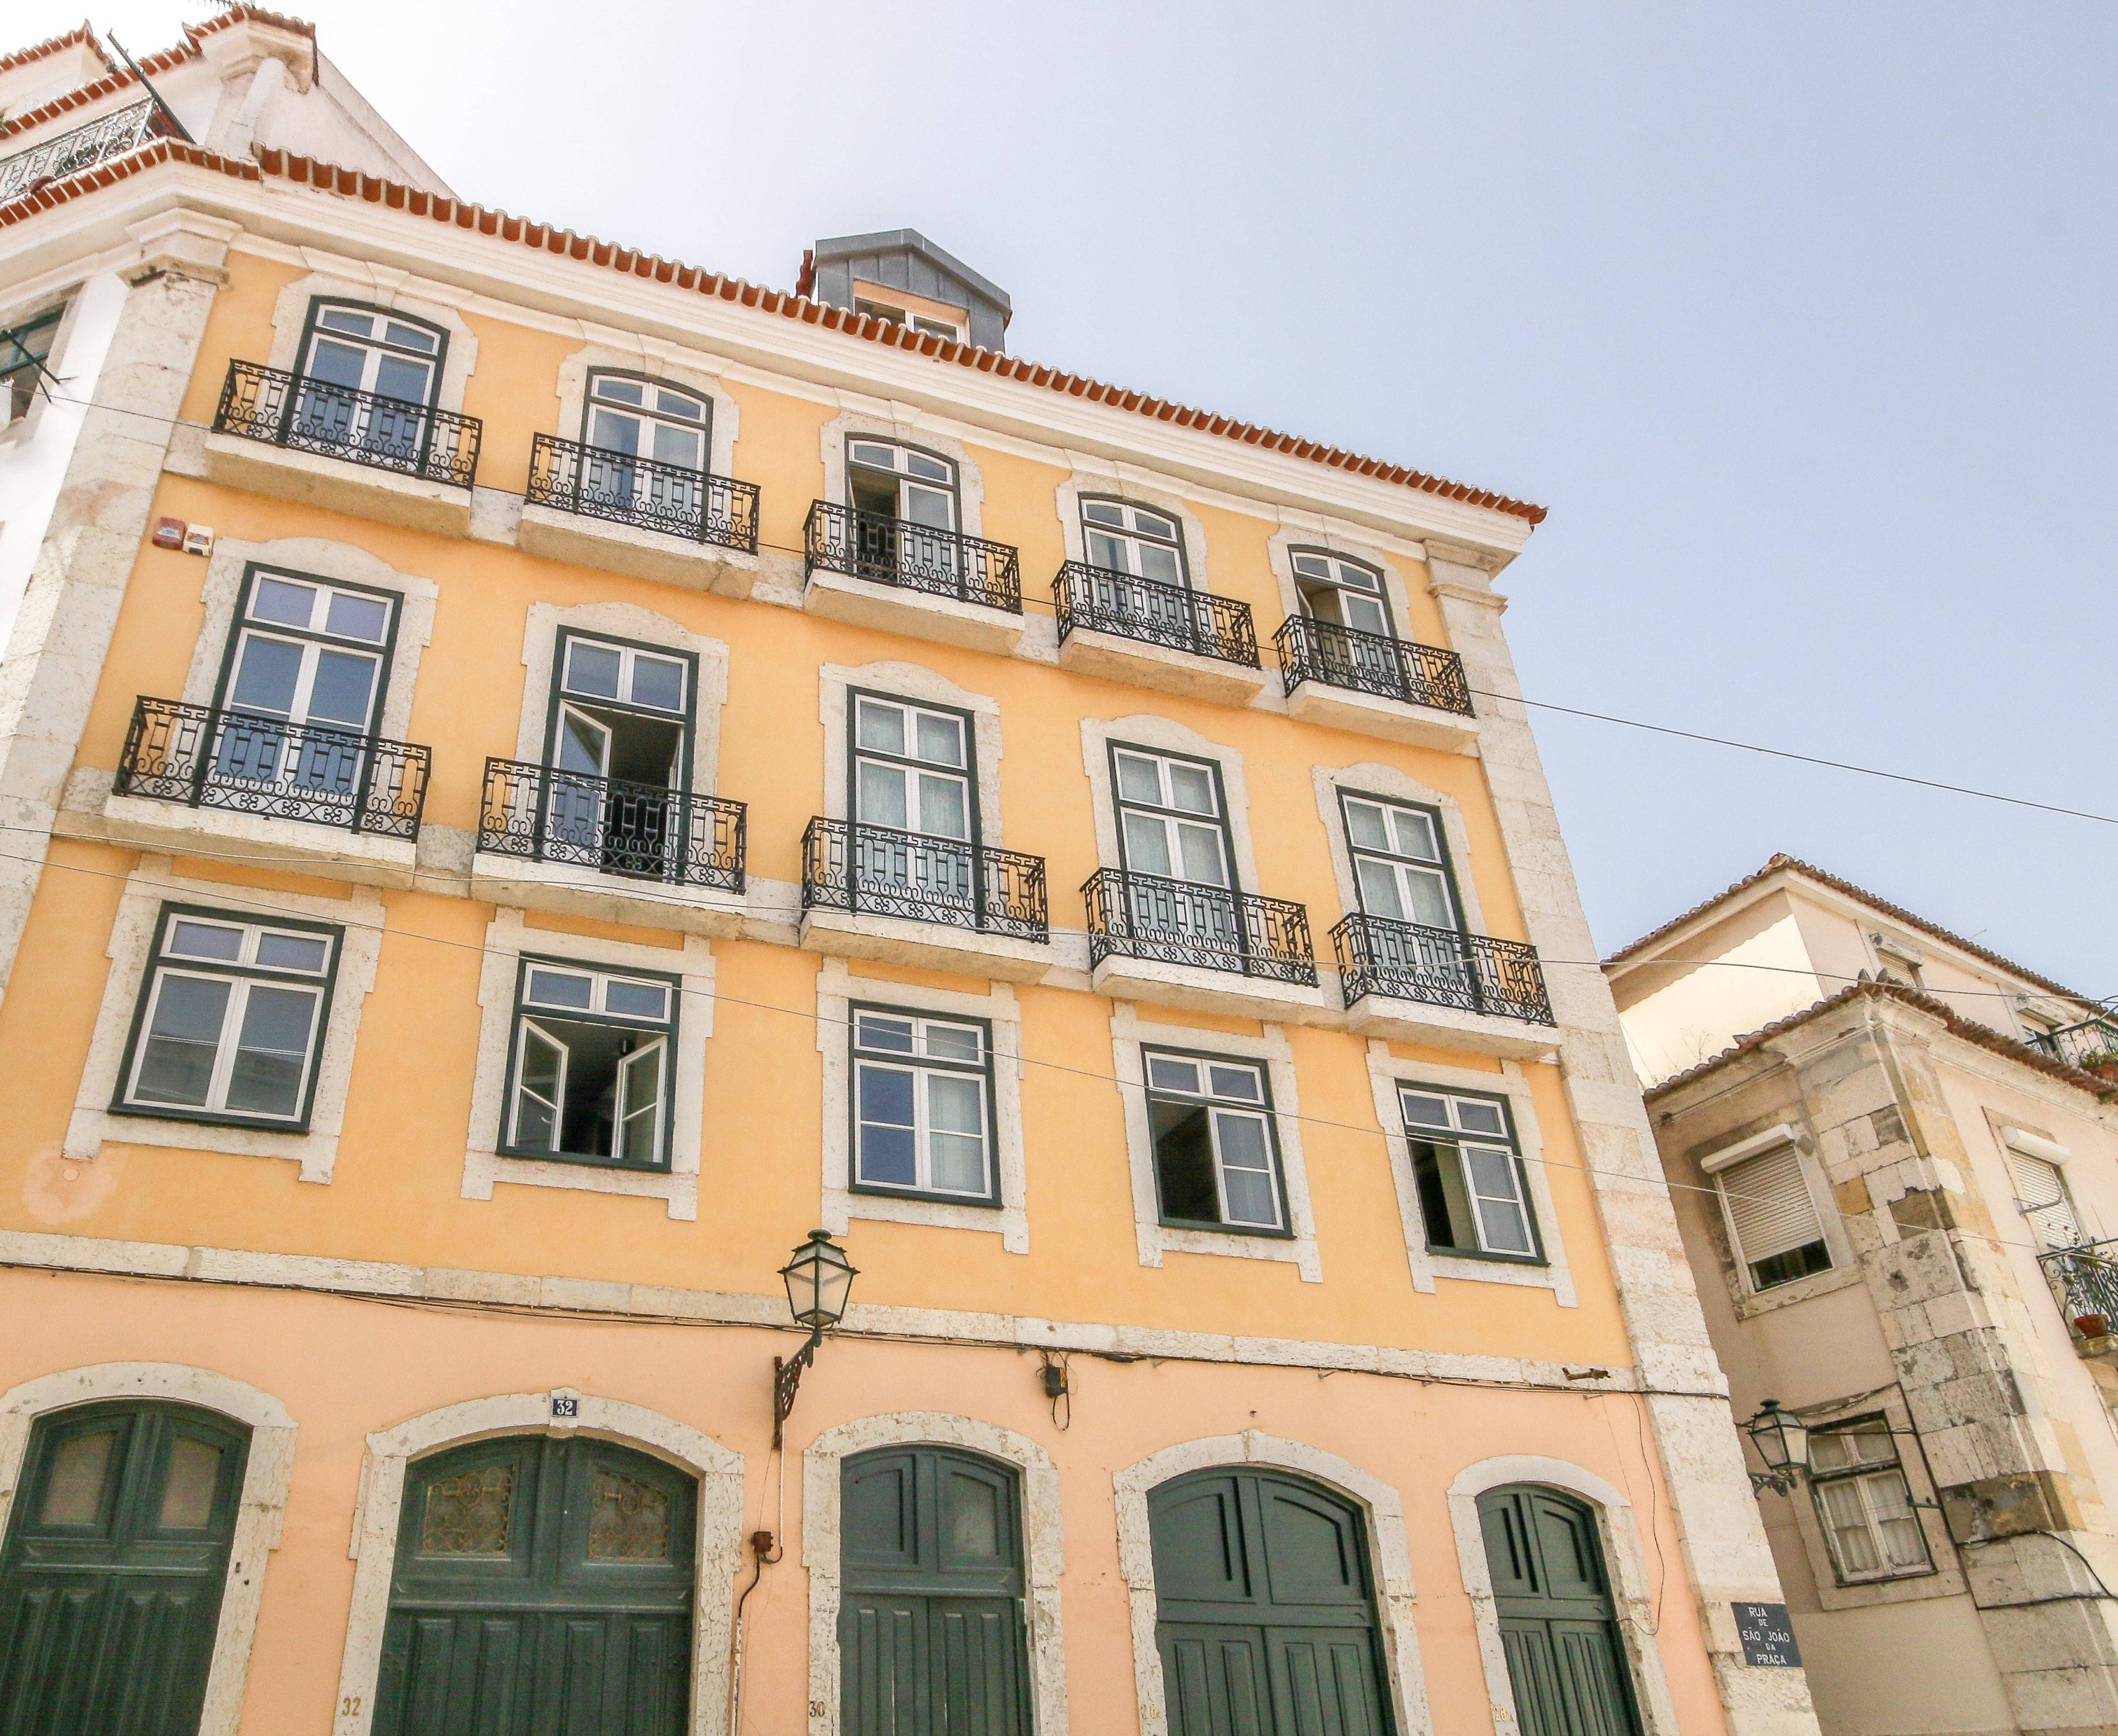 XVIII Century Palace. Historical Old Town, at Sé District, with iconic Lisbon views